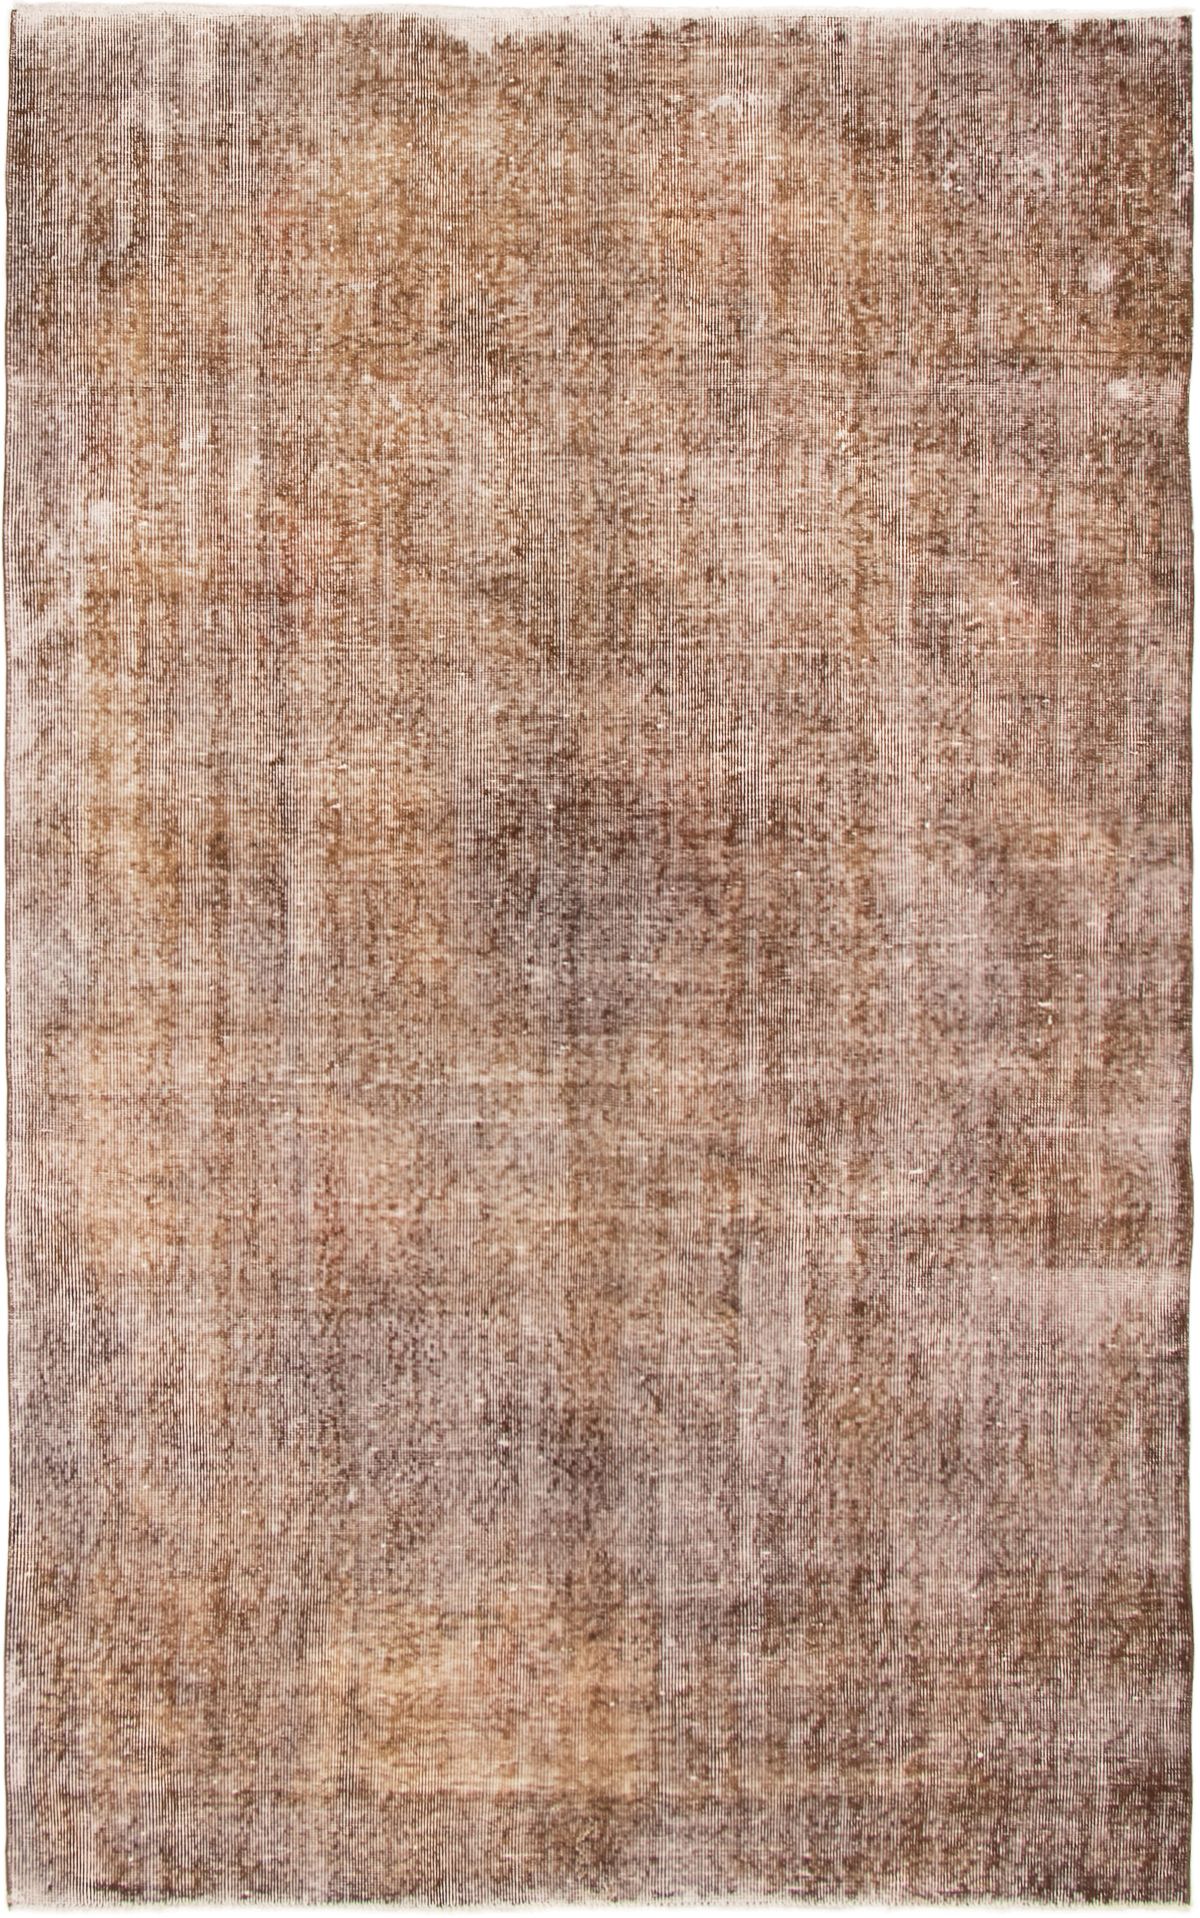 Hand-knotted Color Transition Brown Wool Rug 5'6" x 8'10" Size: 5'6" x 8'10"  